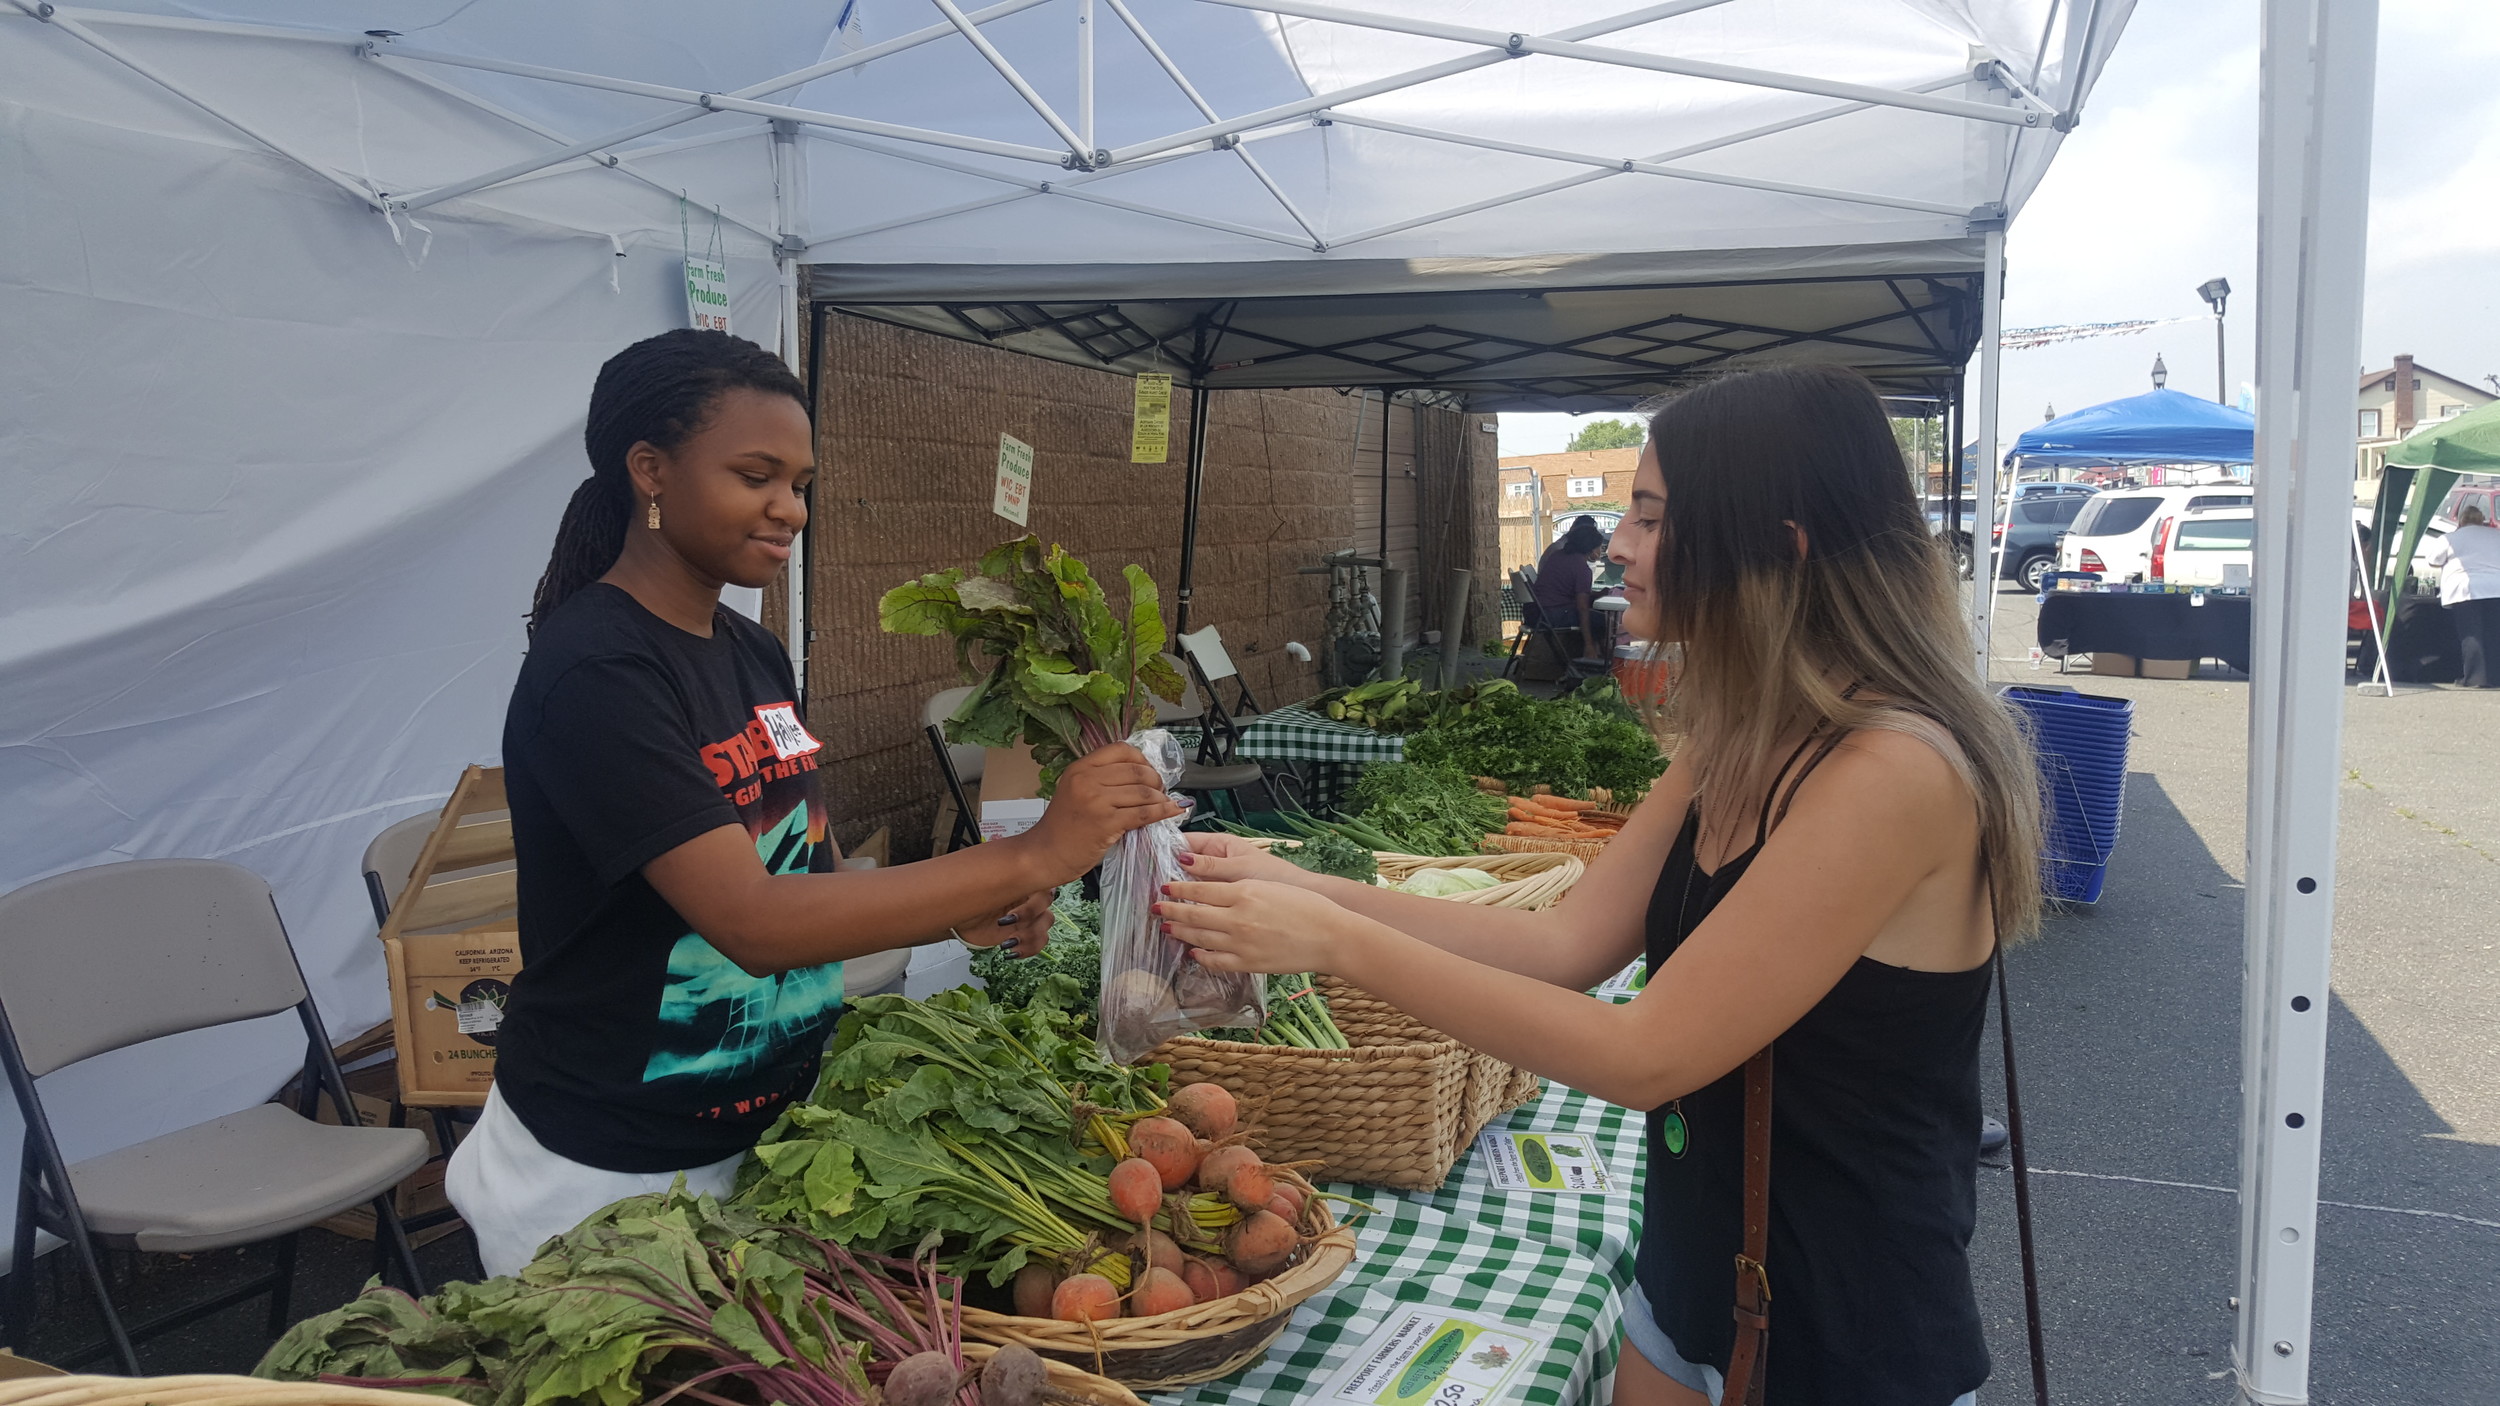 Freeport’s farmers market opening at two locations Herald Community